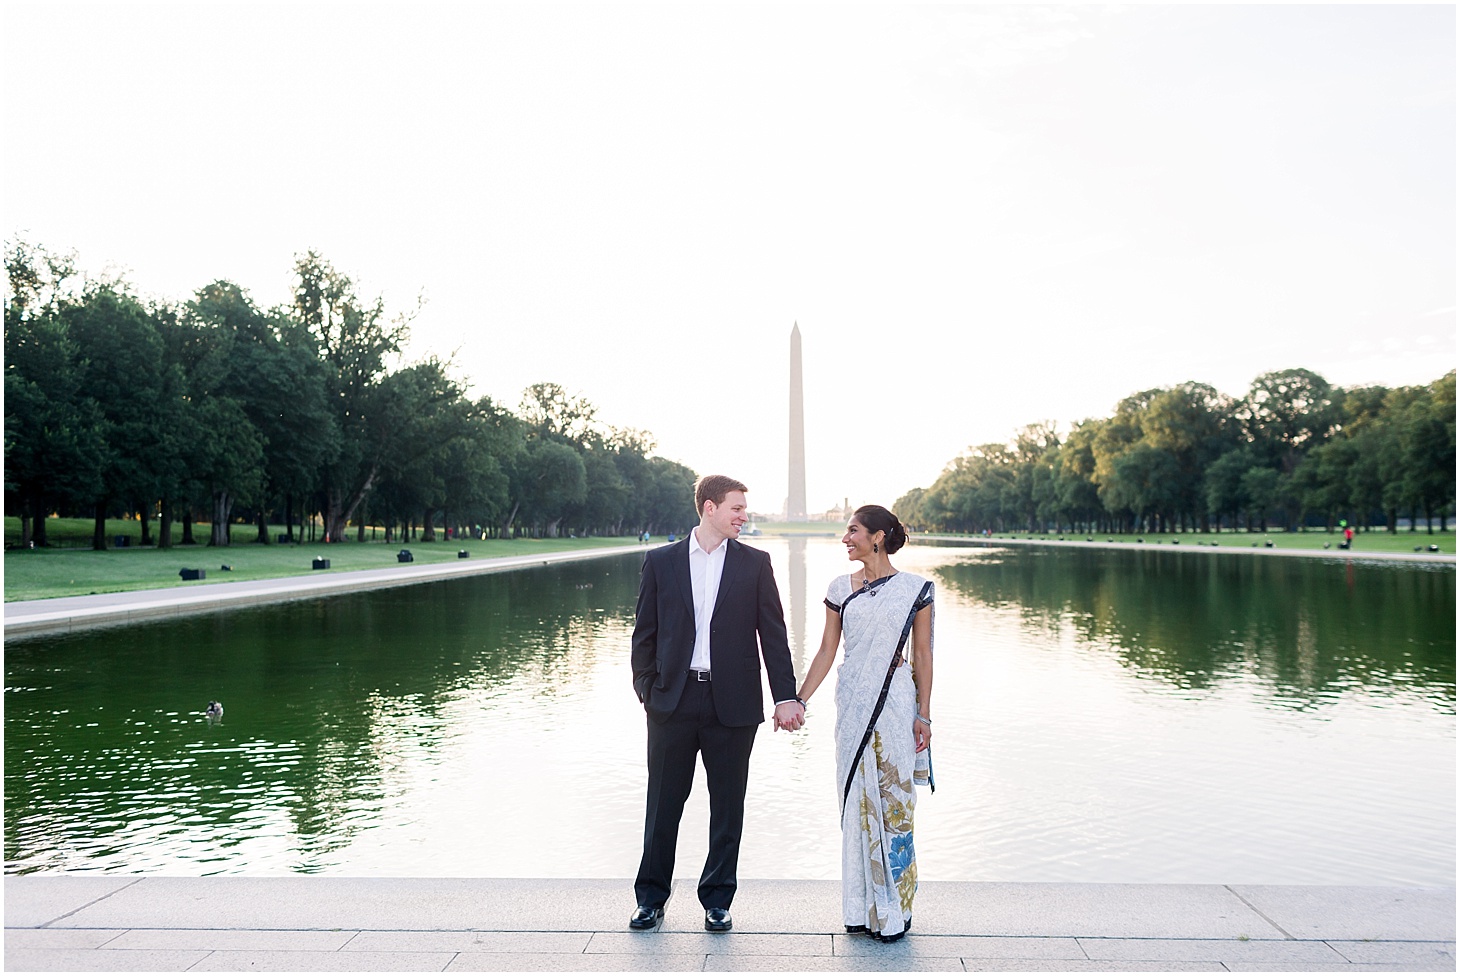 Engagement Portraits at the Reflecting Pool in Washington, DC | Sunrise Engagement Session at the Lincoln Memorial Reflecting Pool | Sarah Bradshaw Photography